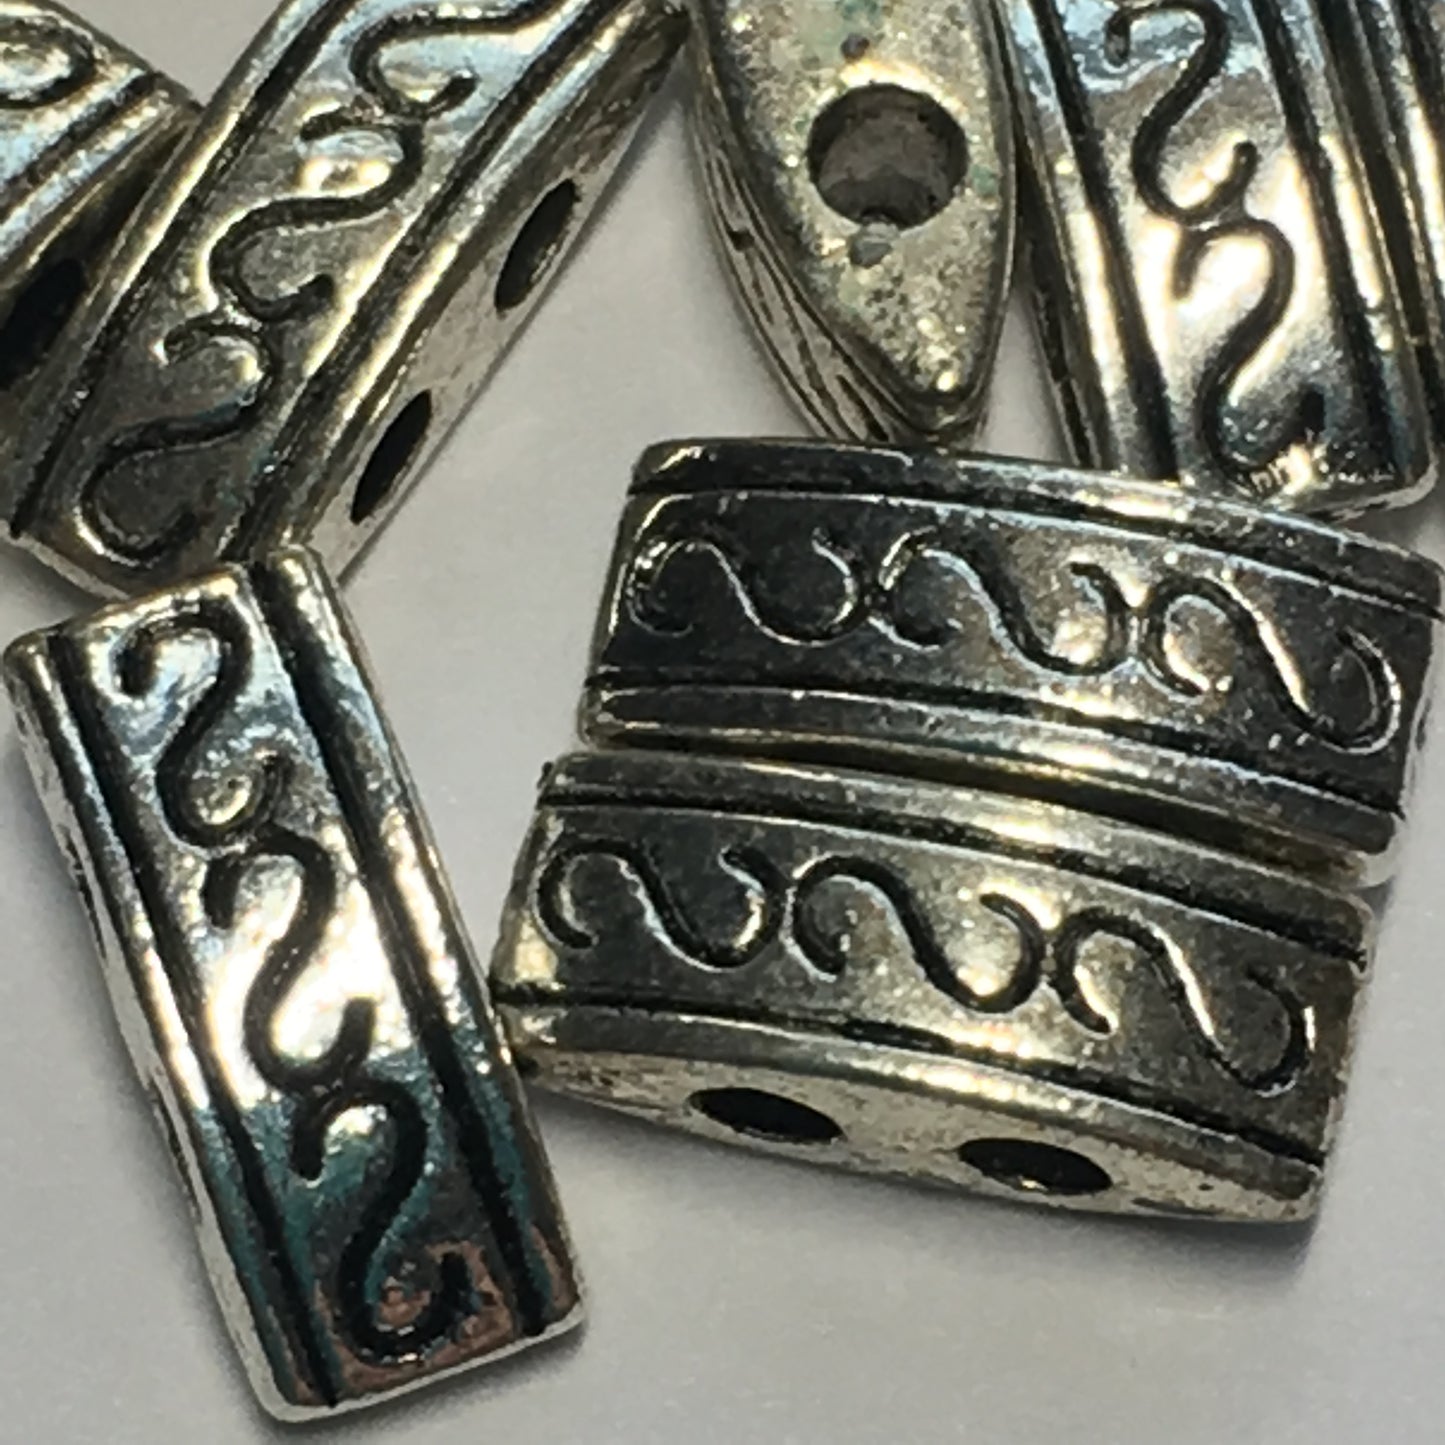 Antique Silver Two-Strand Spacer Bead, 10 x 4 mm - 10 or 20 Beads